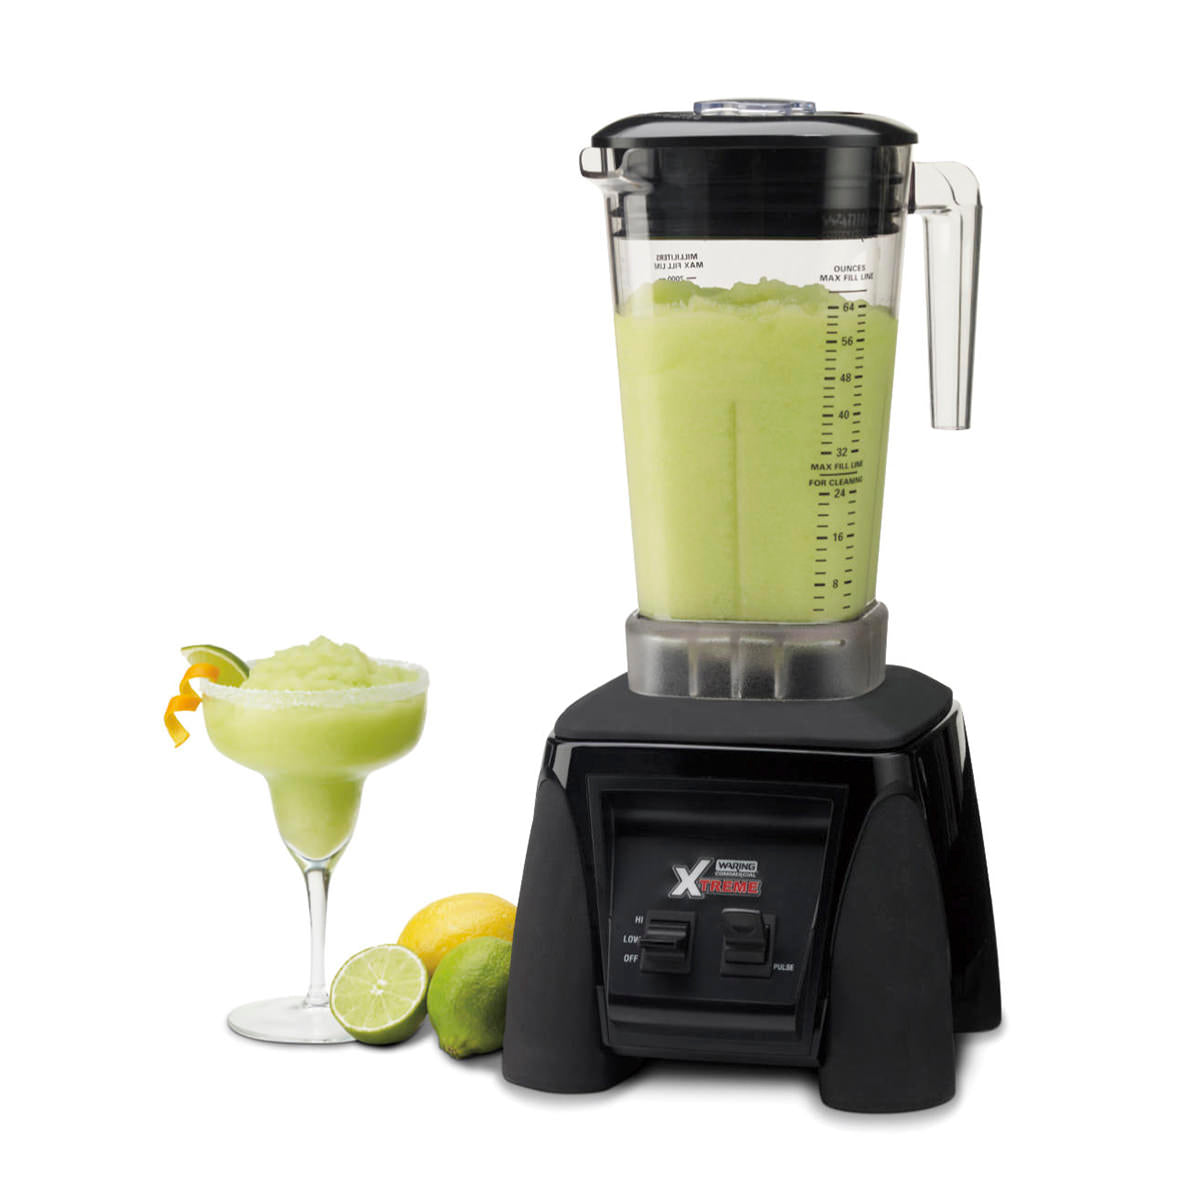 MX1000XTX Heavy-Duty Blender with "The Raptor" 64 oz Copolyester Jar by Waring Commercial